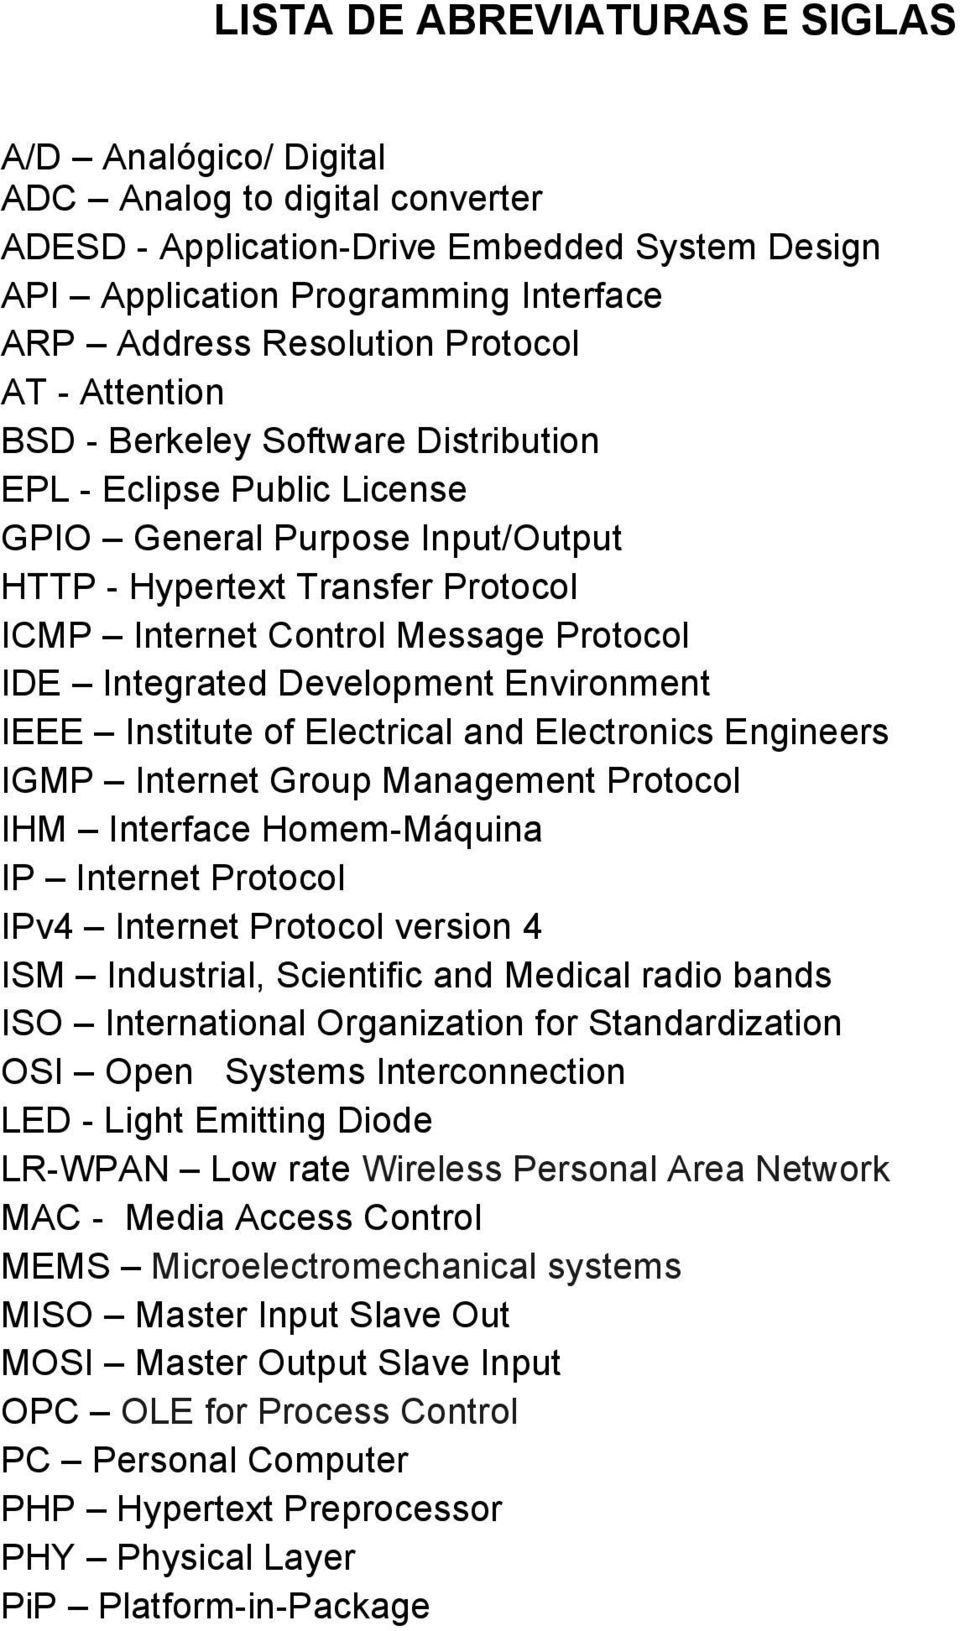 IDE Integrated Development Environment IEEE Institute of Electrical and Electronics Engineers IGMP Internet Group Management Protocol IHM Interface Homem-Máquina IP Internet Protocol IPv4 Internet